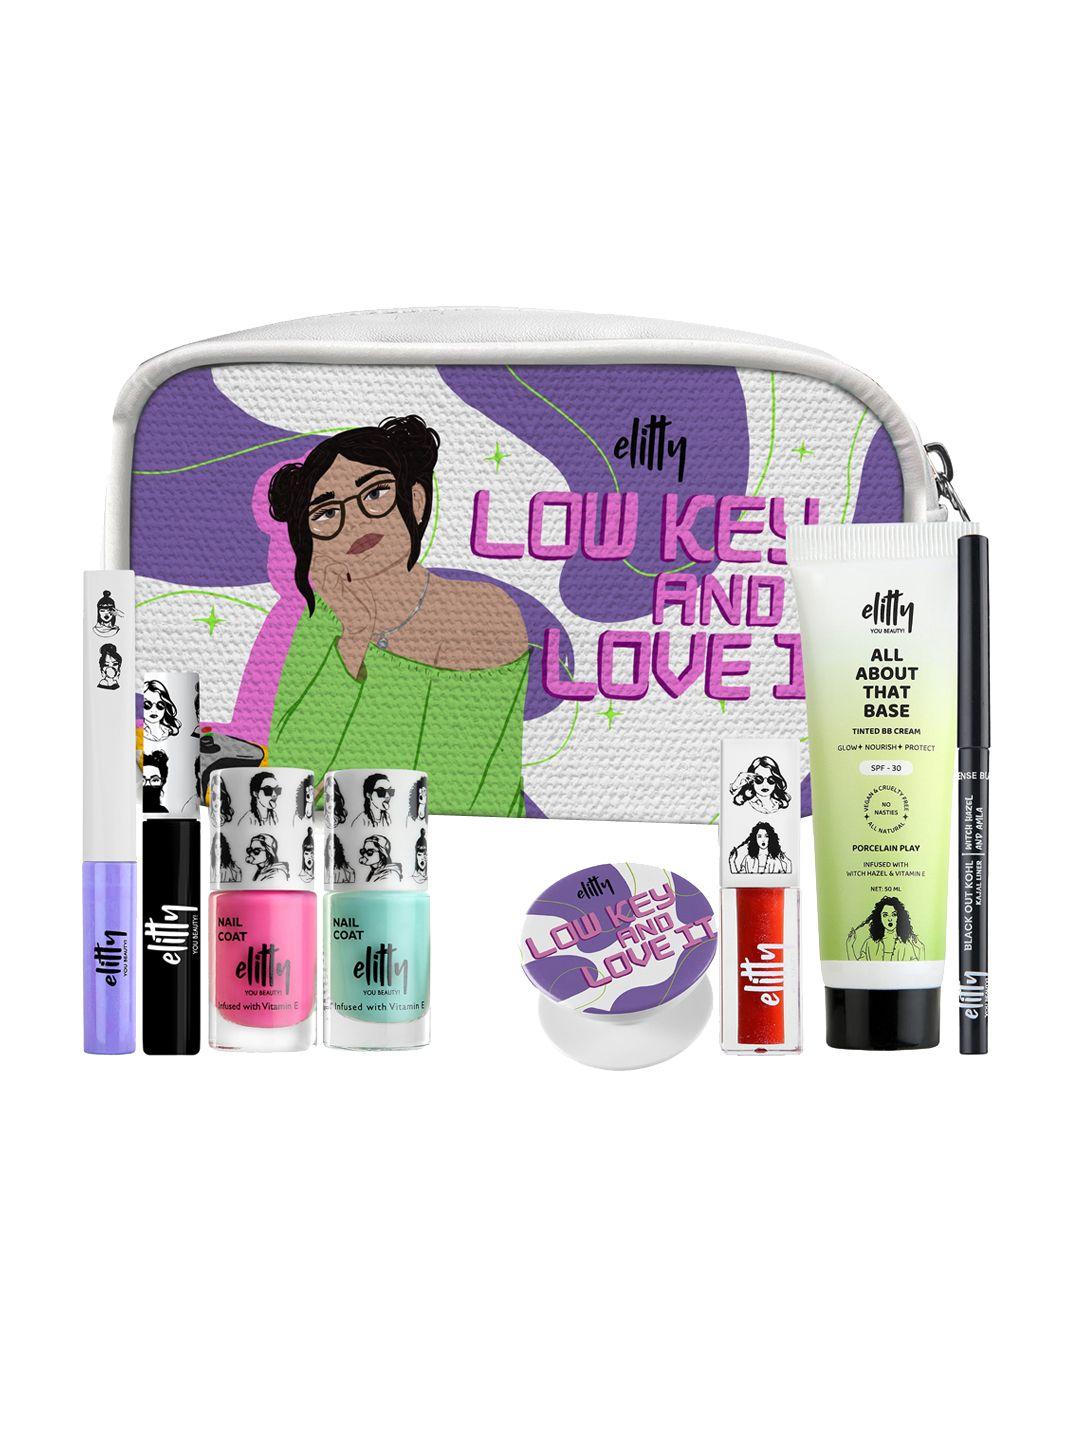 elitty low key and love it makeup kit 7 products 2 freebies &1 pouch